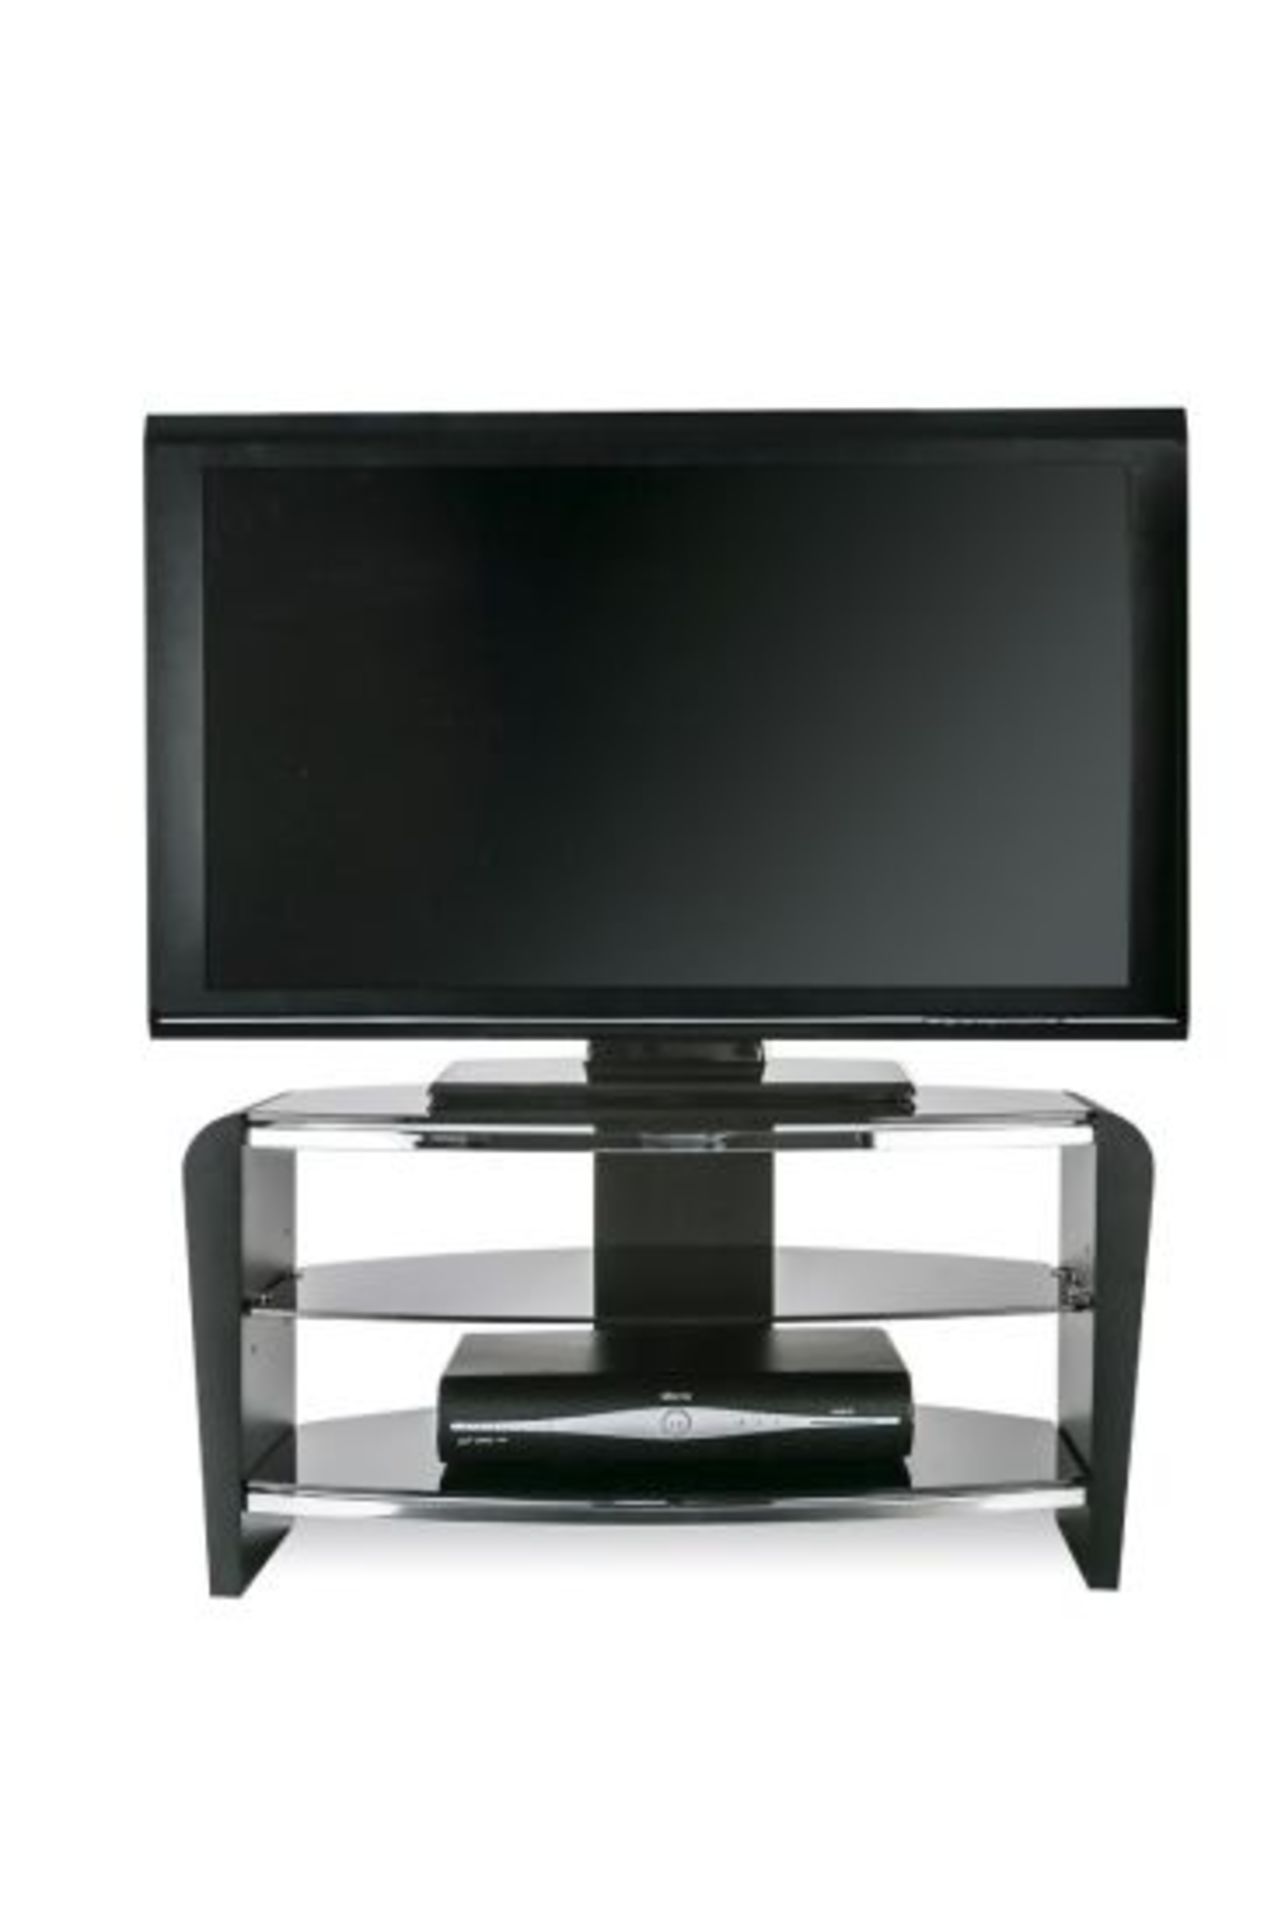 1 ASSEMBLED AS NEW FRANCIUM 800 TV UNIT IN BLACK GLOSS (EX SHOWROOM STOCK)